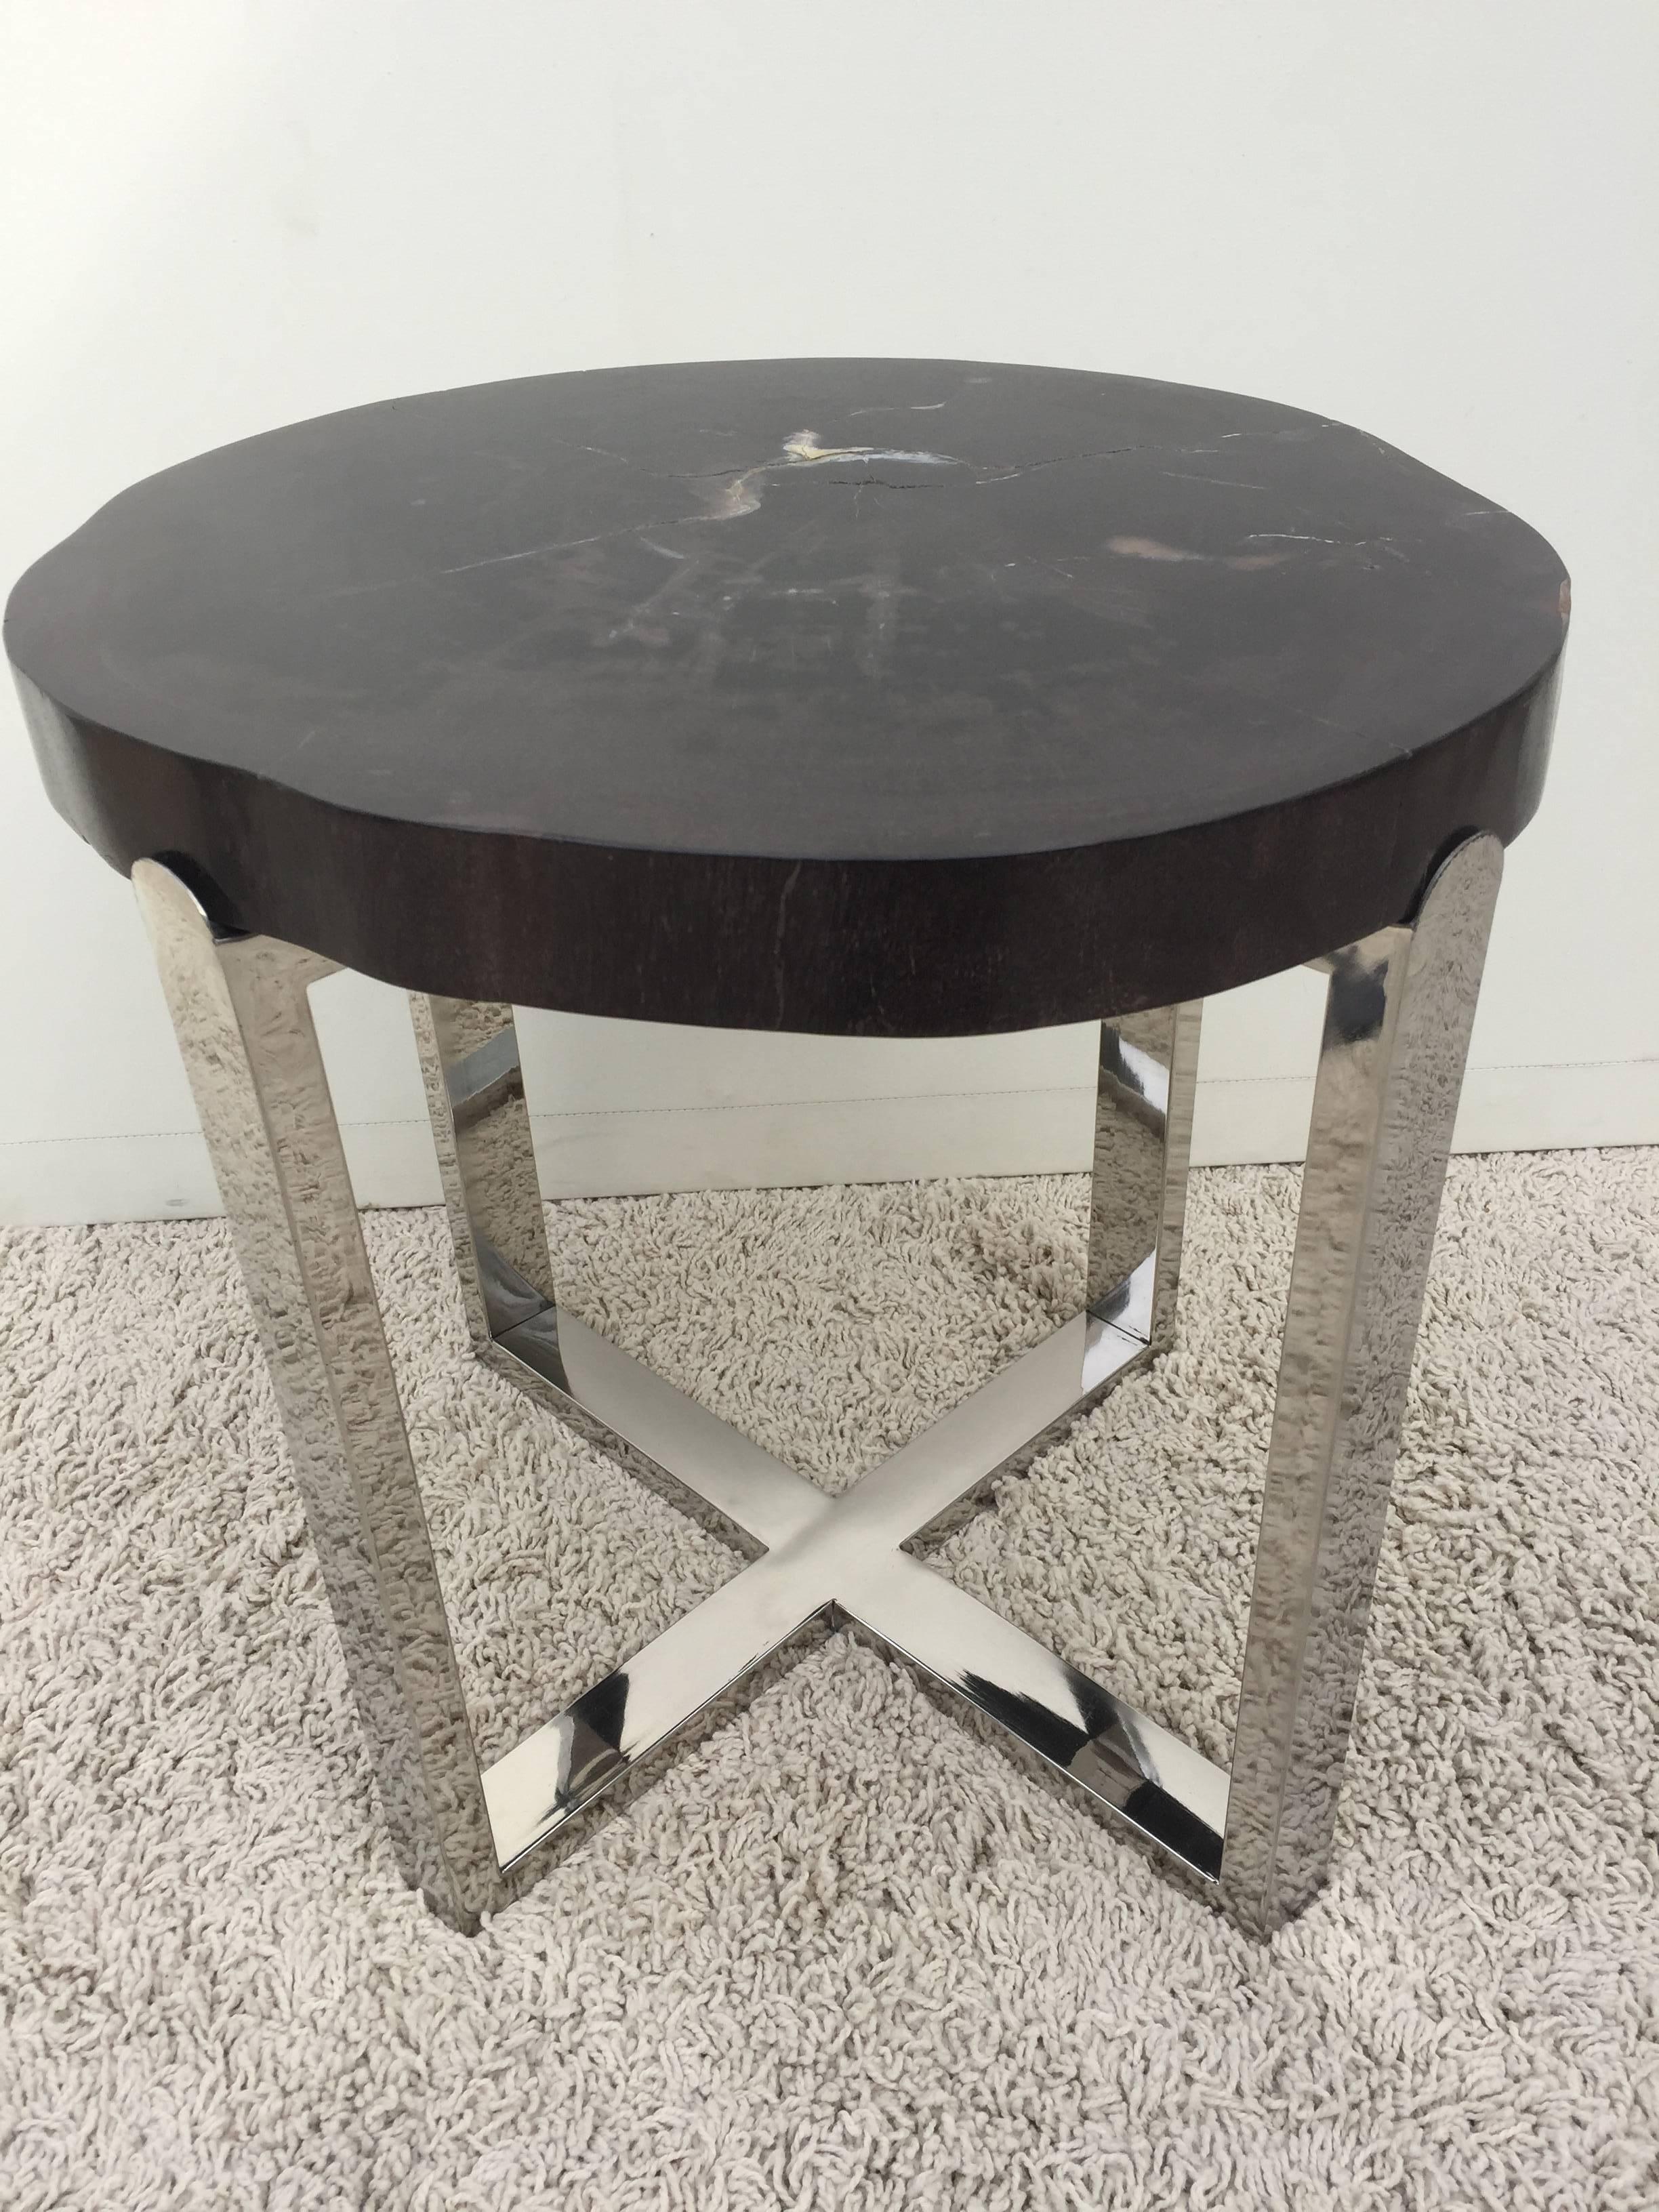 Polished Pair of Petrified Wood Black & Crème Vein Top Chrome Handmade Petite Side Tables For Sale